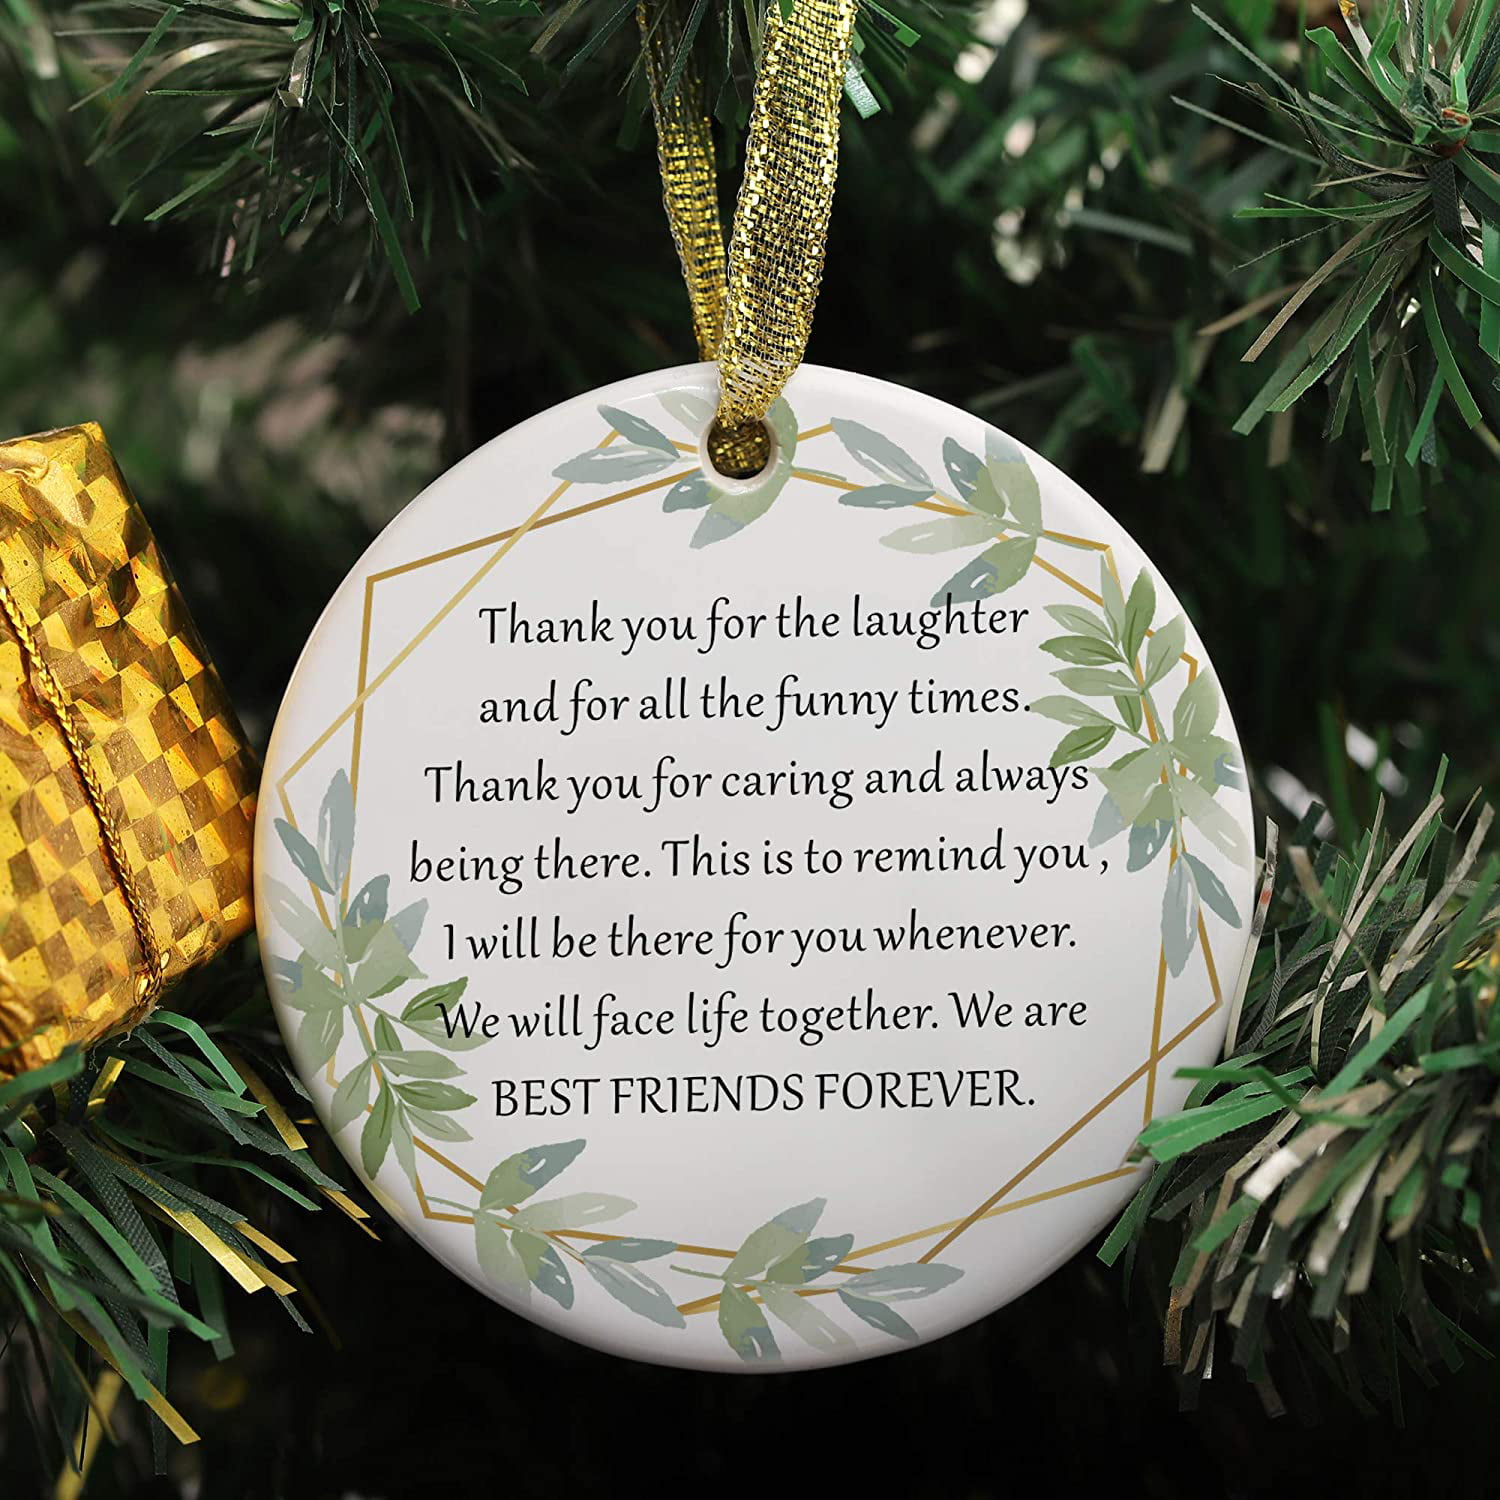 Gift for Friends Friends Forever Ornament Distance Ornament Best Friend Ornament State Ornament Personalized Ornament BFF